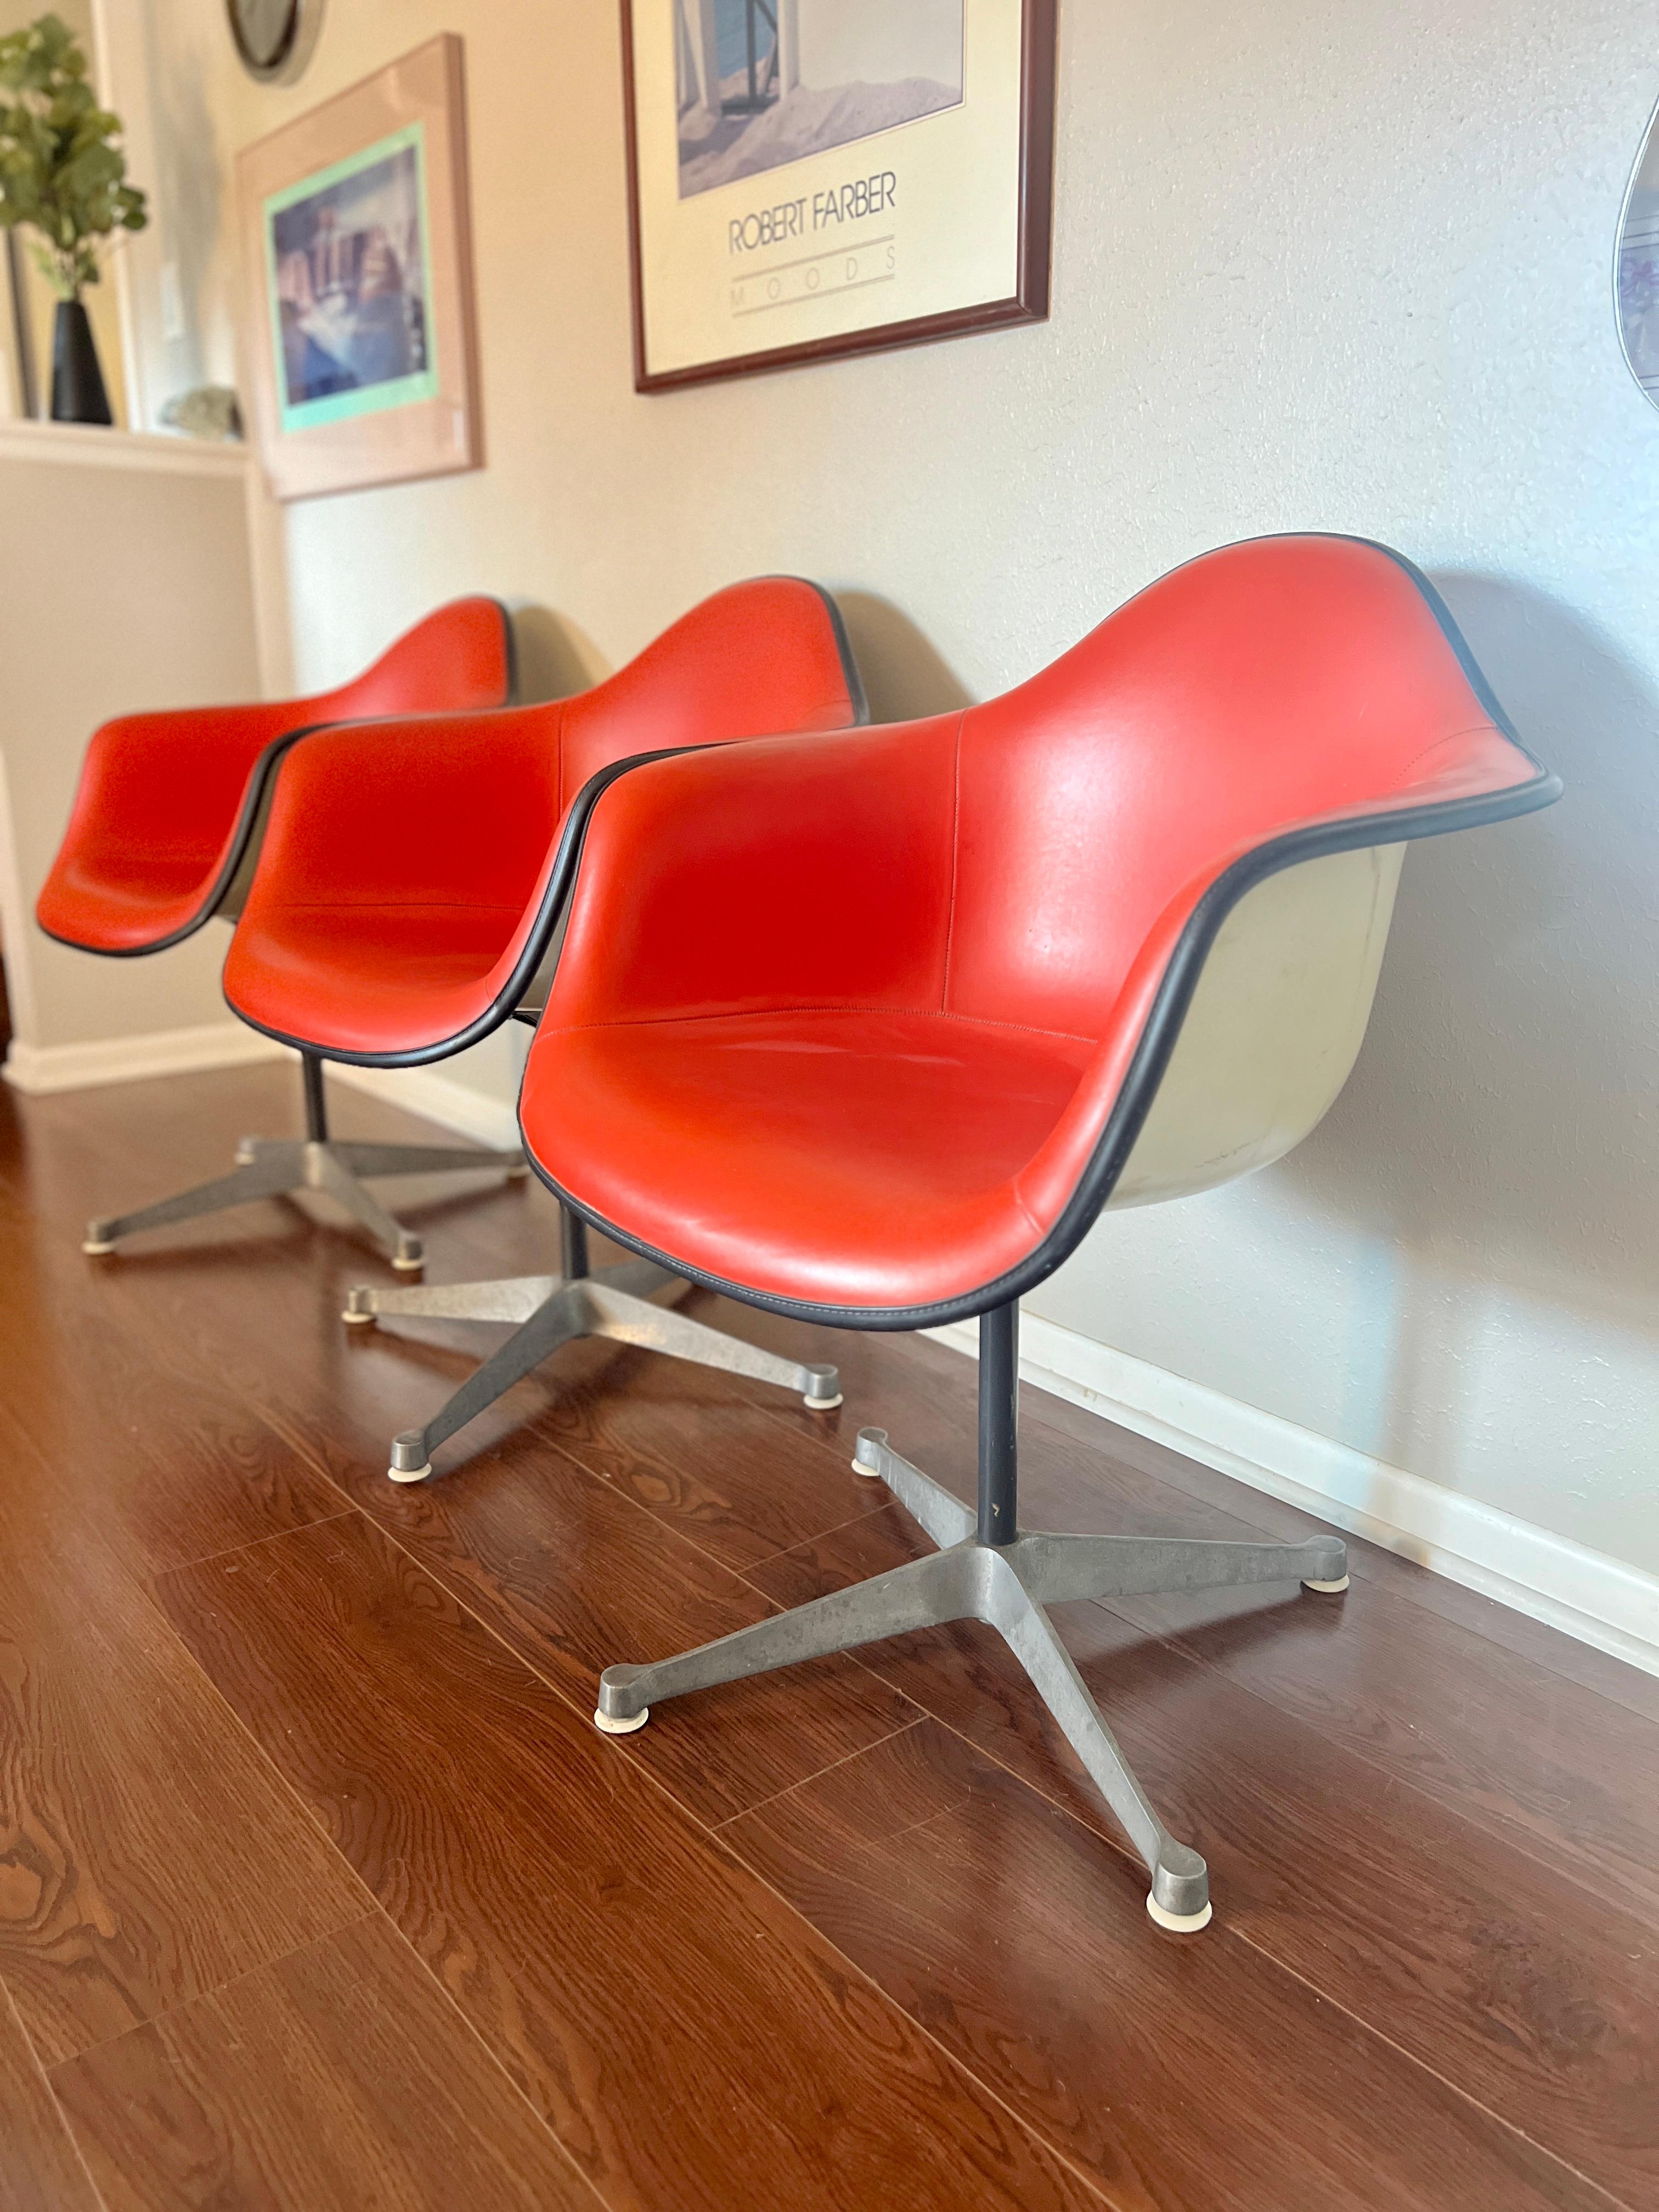 Vintage Midcentury Charles & Ray Eames Fiberglass Shell Chairs by Herman Miller 6